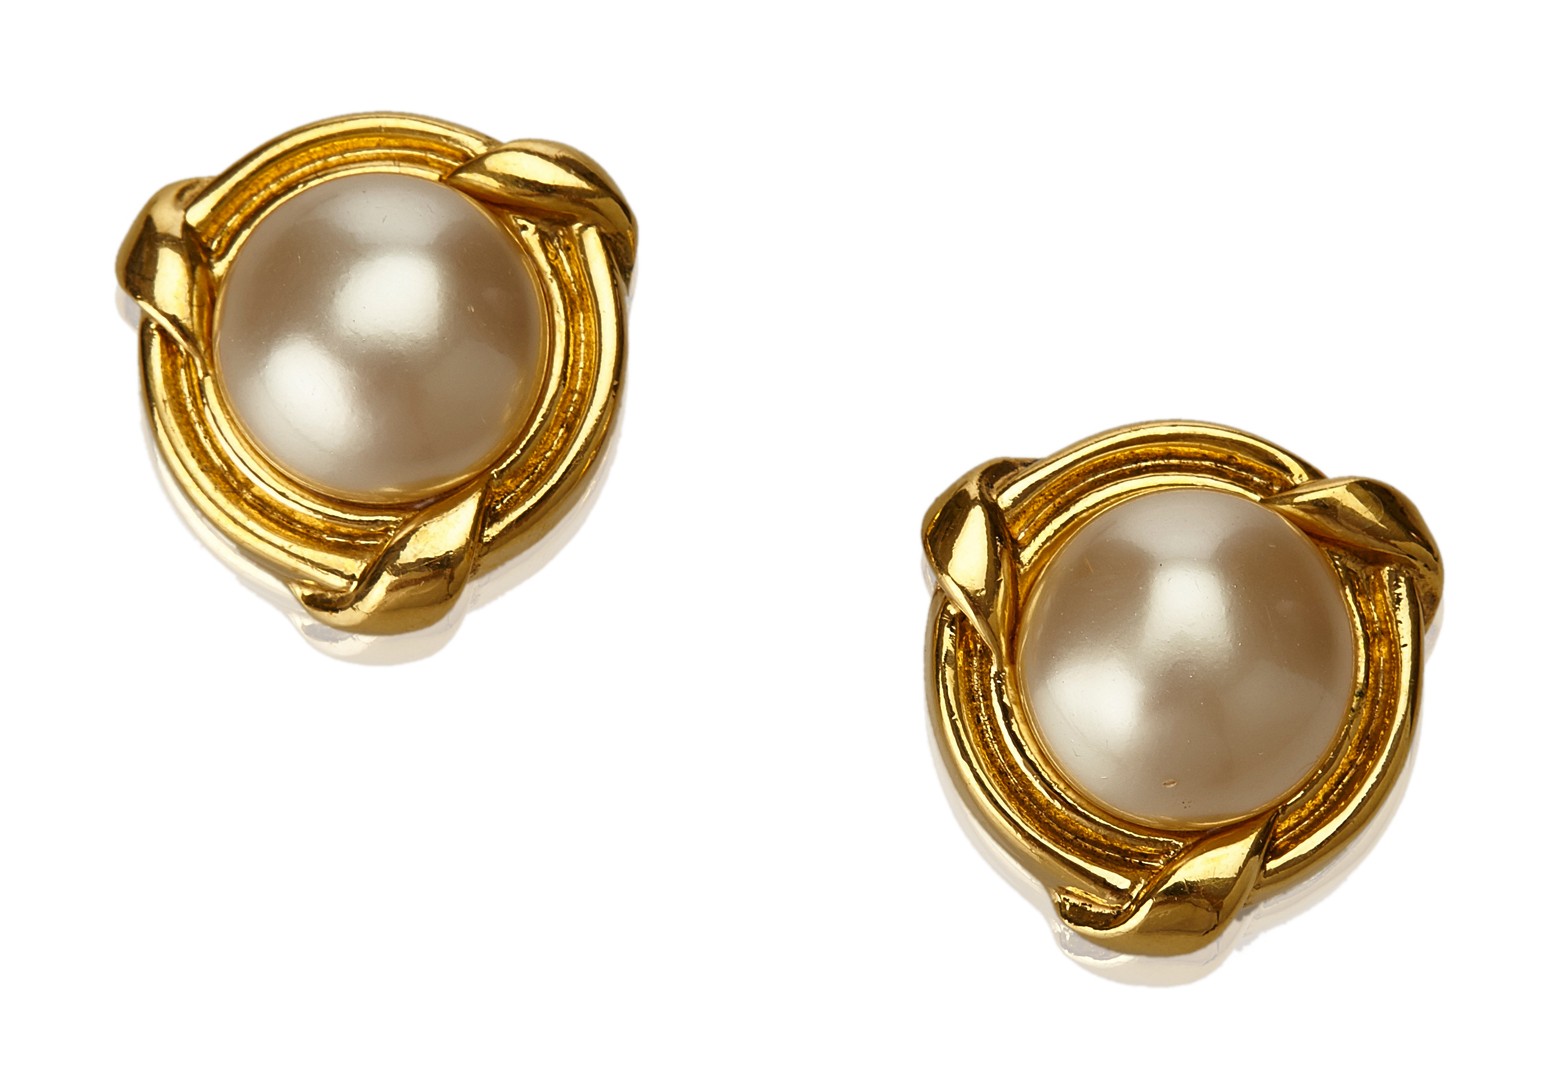 Vintage gold clip on earrings with faux pearls